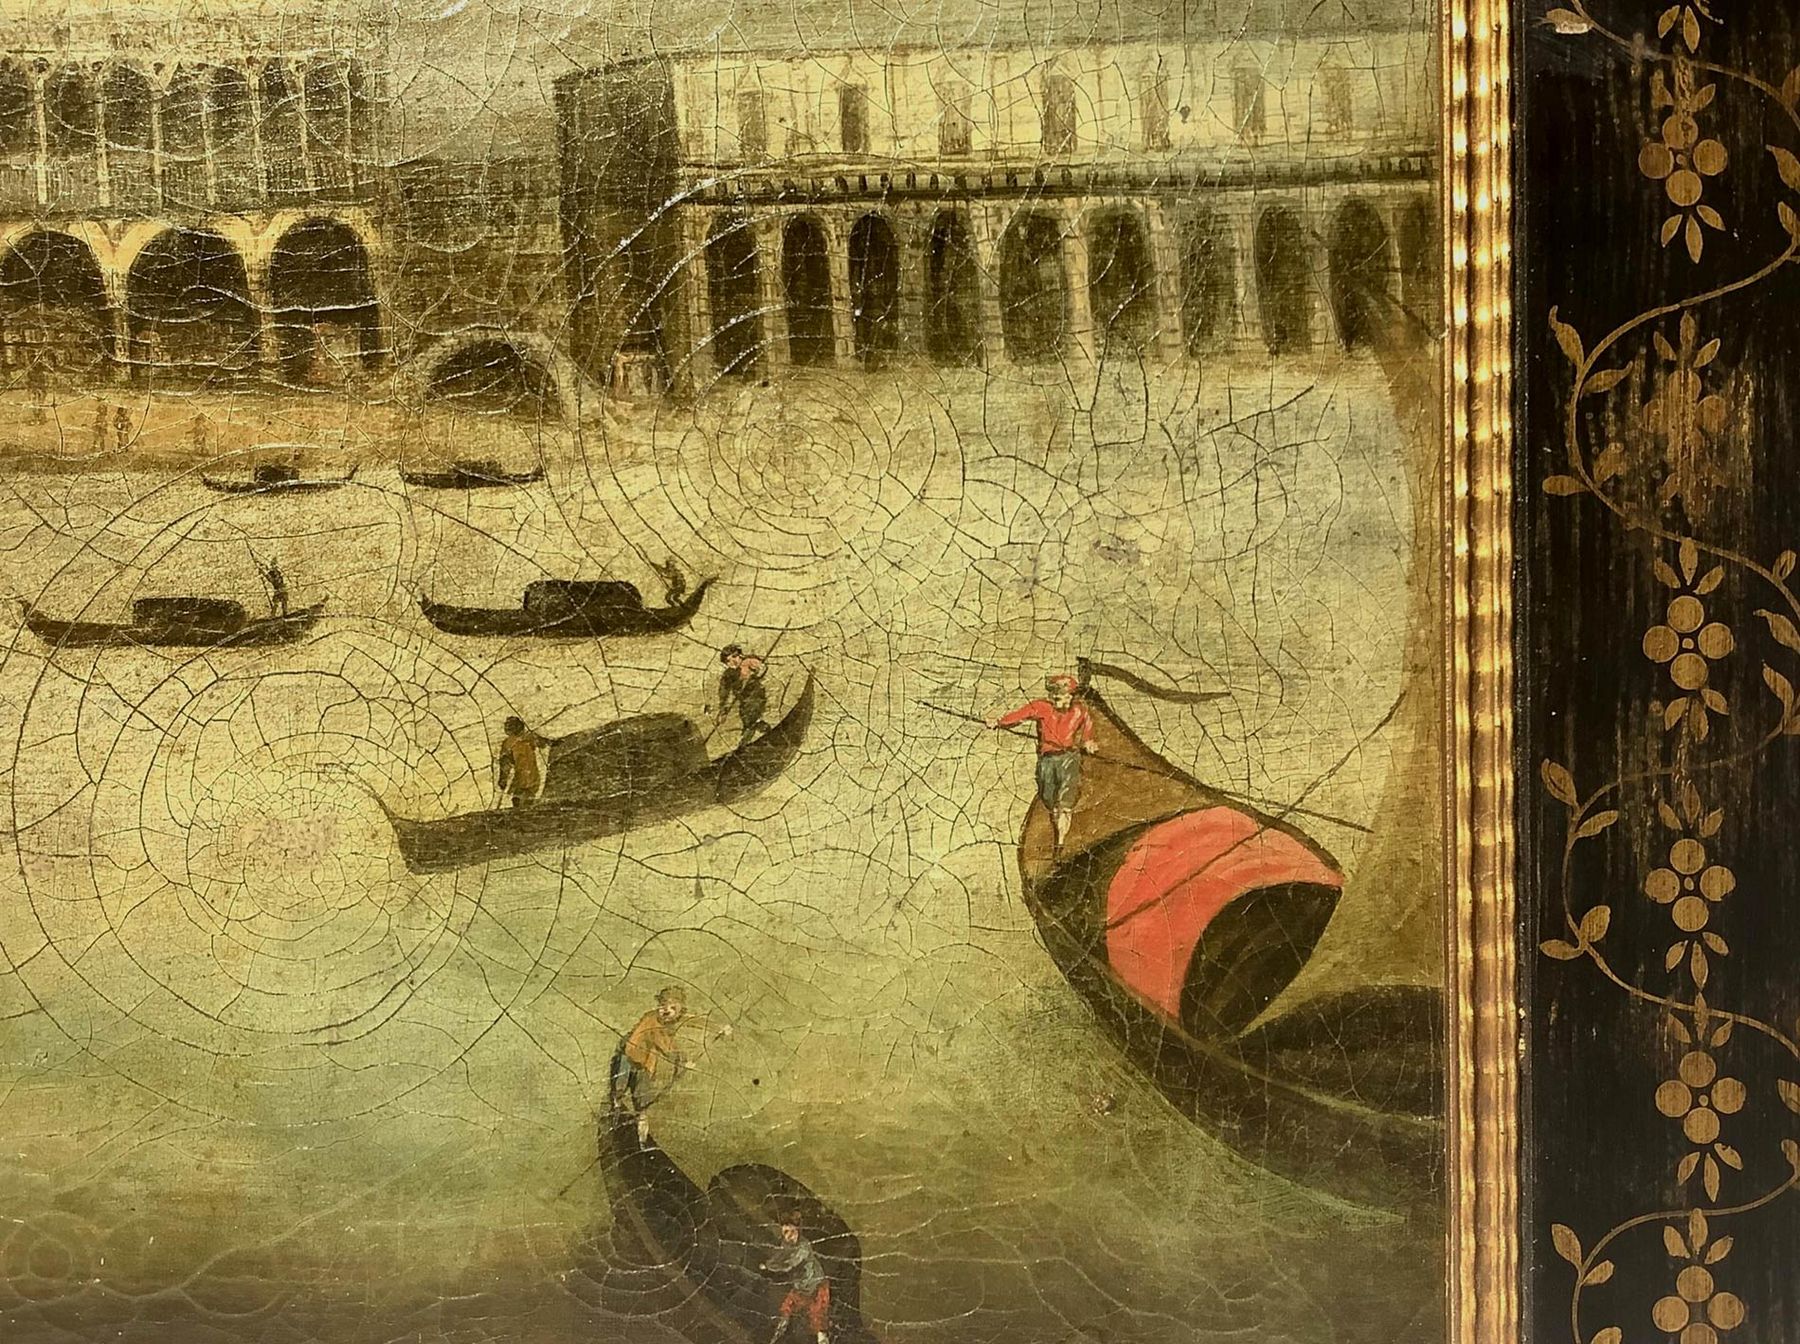 Oil painting on canvas depicting the Doge's Palace in Venice, seventeenth / eighteenth century Venet - Image 3 of 6